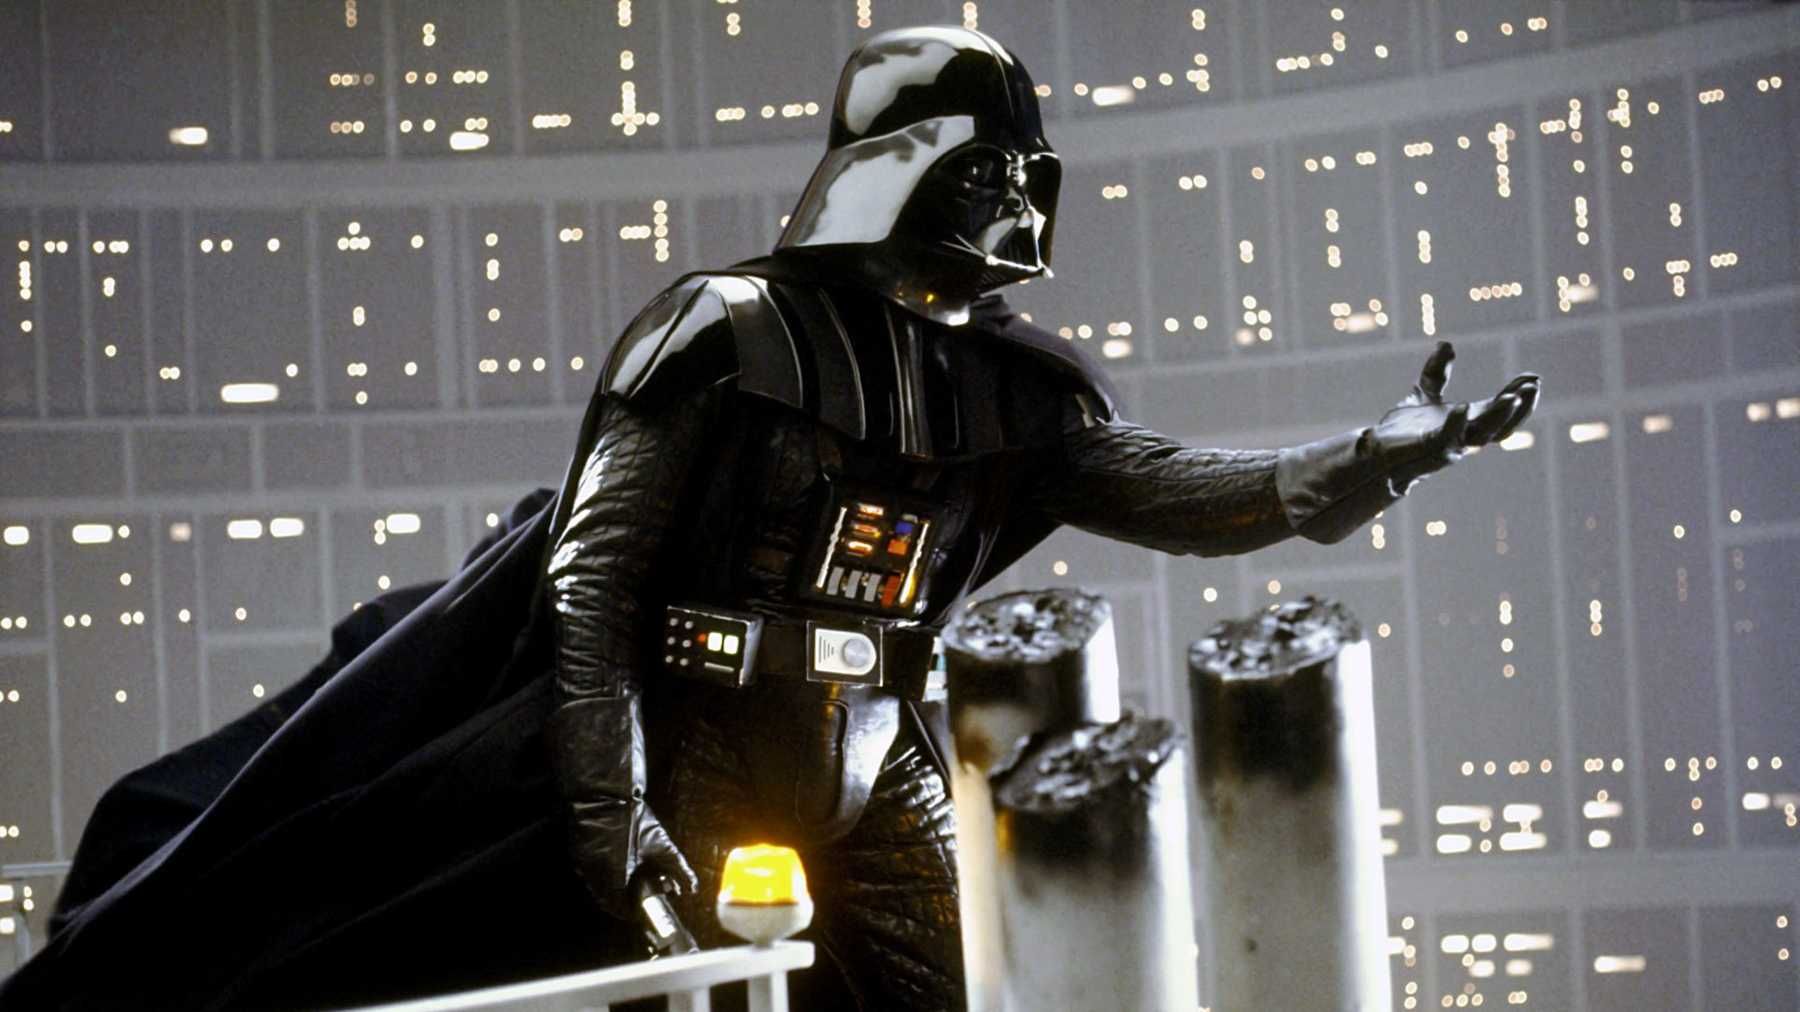 Darth Vader extending his arm in Star Wars: The Empire Strikes Back